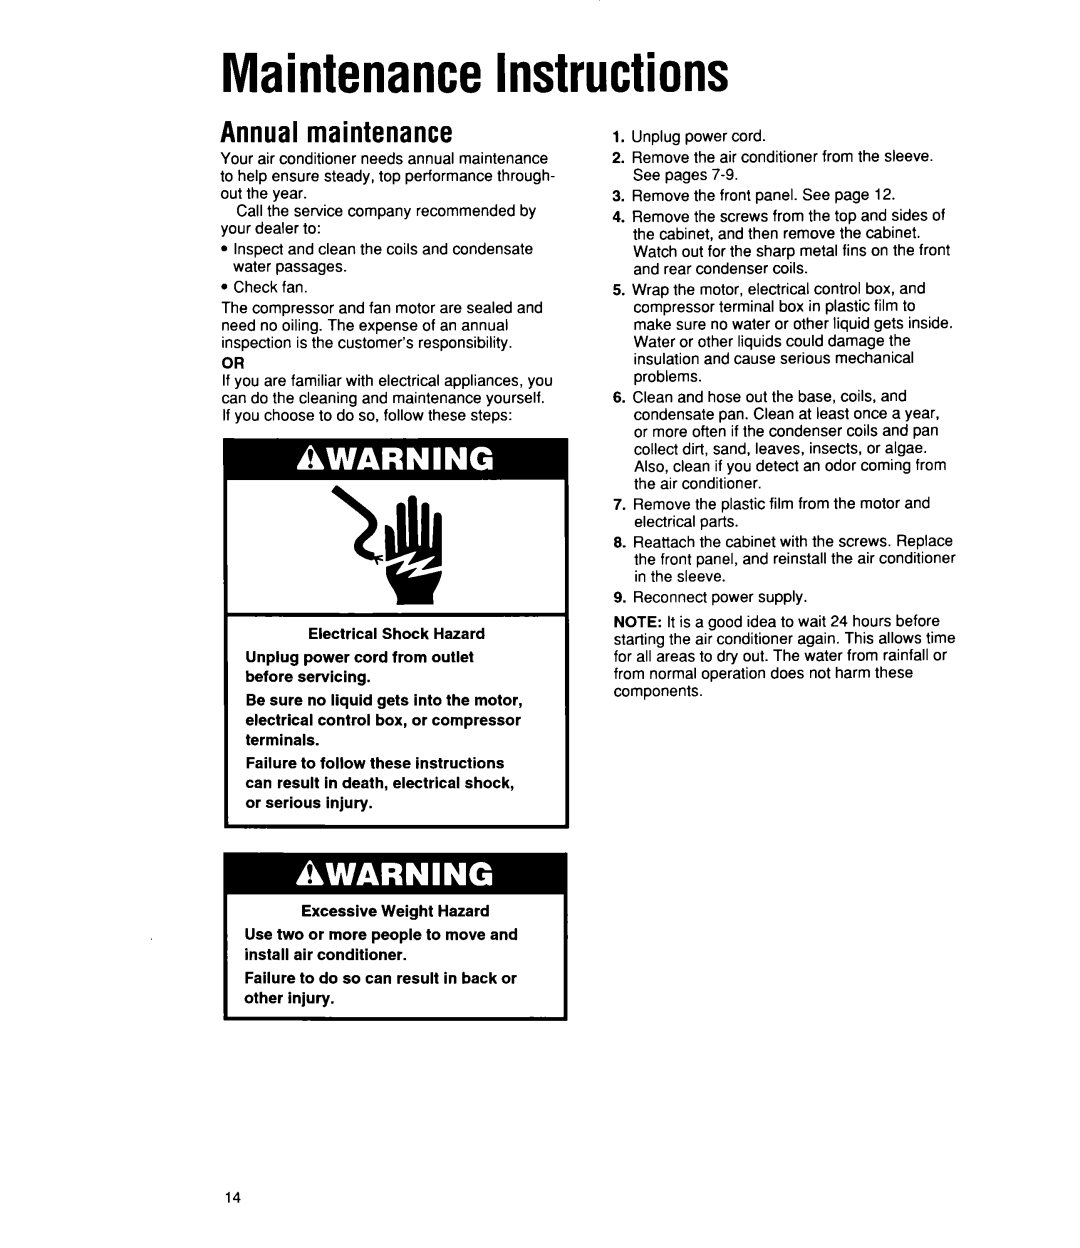 Whirlpool ACU072XE installation instructions MaintenanceInstructions, Annual maintenance 